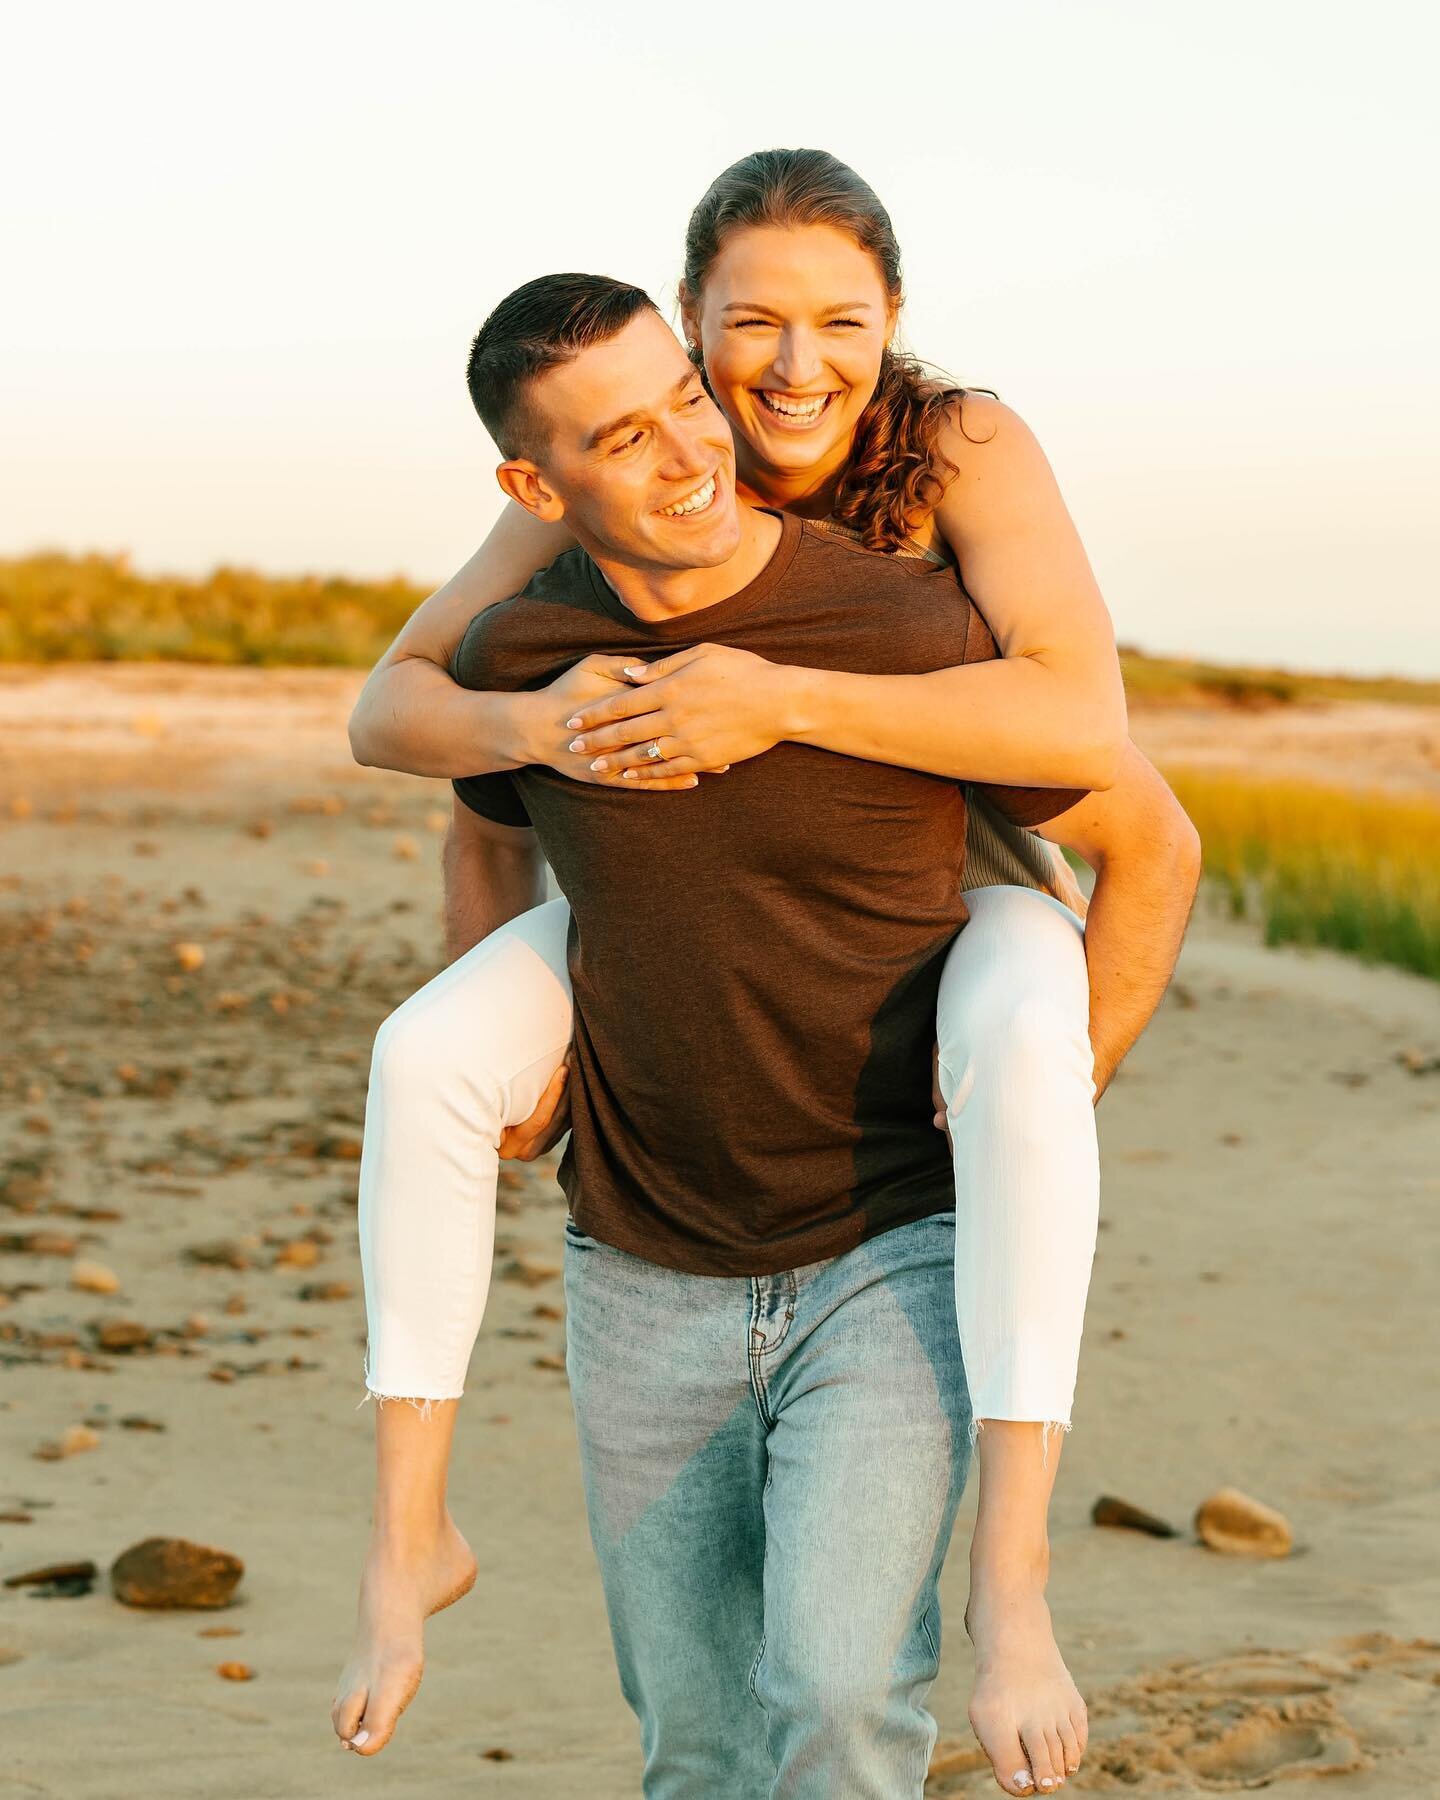 Alanna and Shaun&rsquo;s engagement session was filled with lots of giggles, a beautiful sunset and lots of love between these two!! 

Can&rsquo;t wait to capture their wedding next year!! 

#duxburybeach #capecodphotography #capecodphotographer #cap